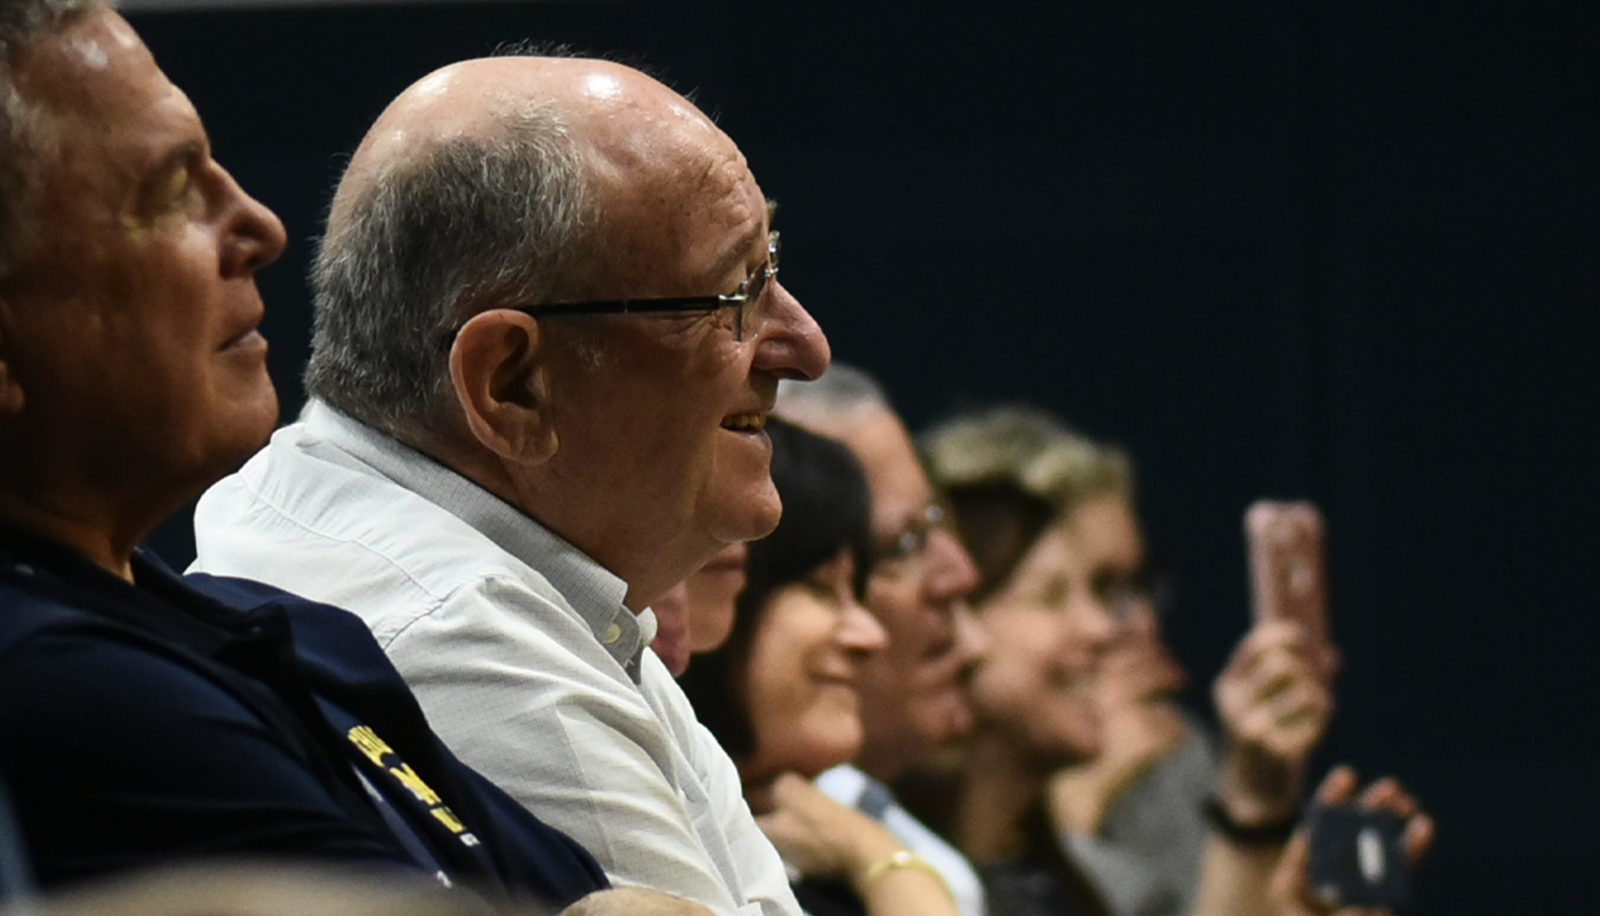 Former Technion president Peretz Lavie listening in at a campus event